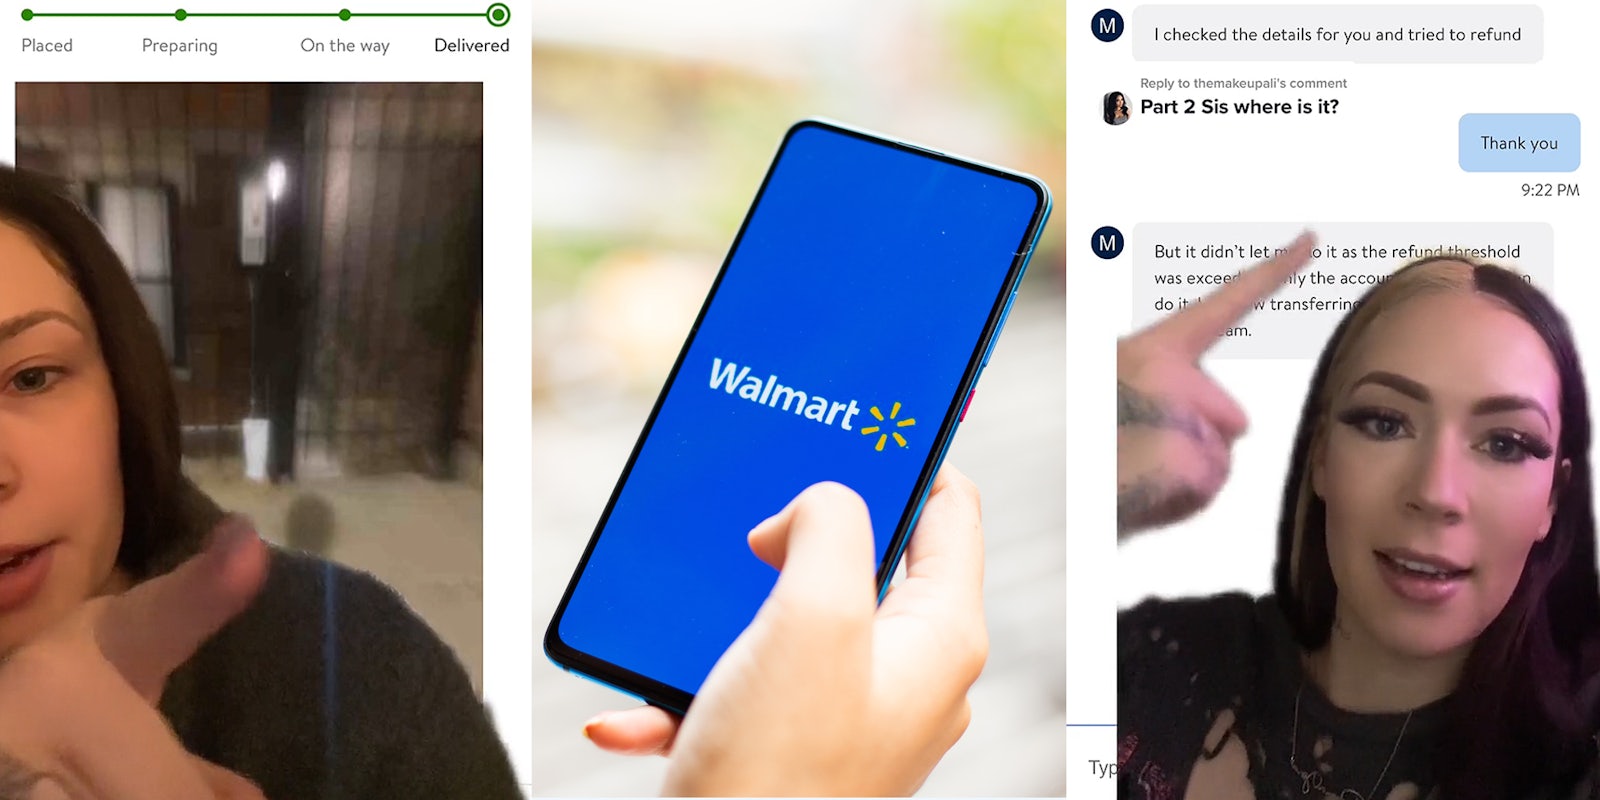 woman greenscreen TikTok over image of package delivery (l) Walmart on phone in hand (c) woman greenscreen TikTok over customer service conversation 'I checked the details for you and tried to refund Thank you But it didn't... Part 2 sis where is it?' (r)